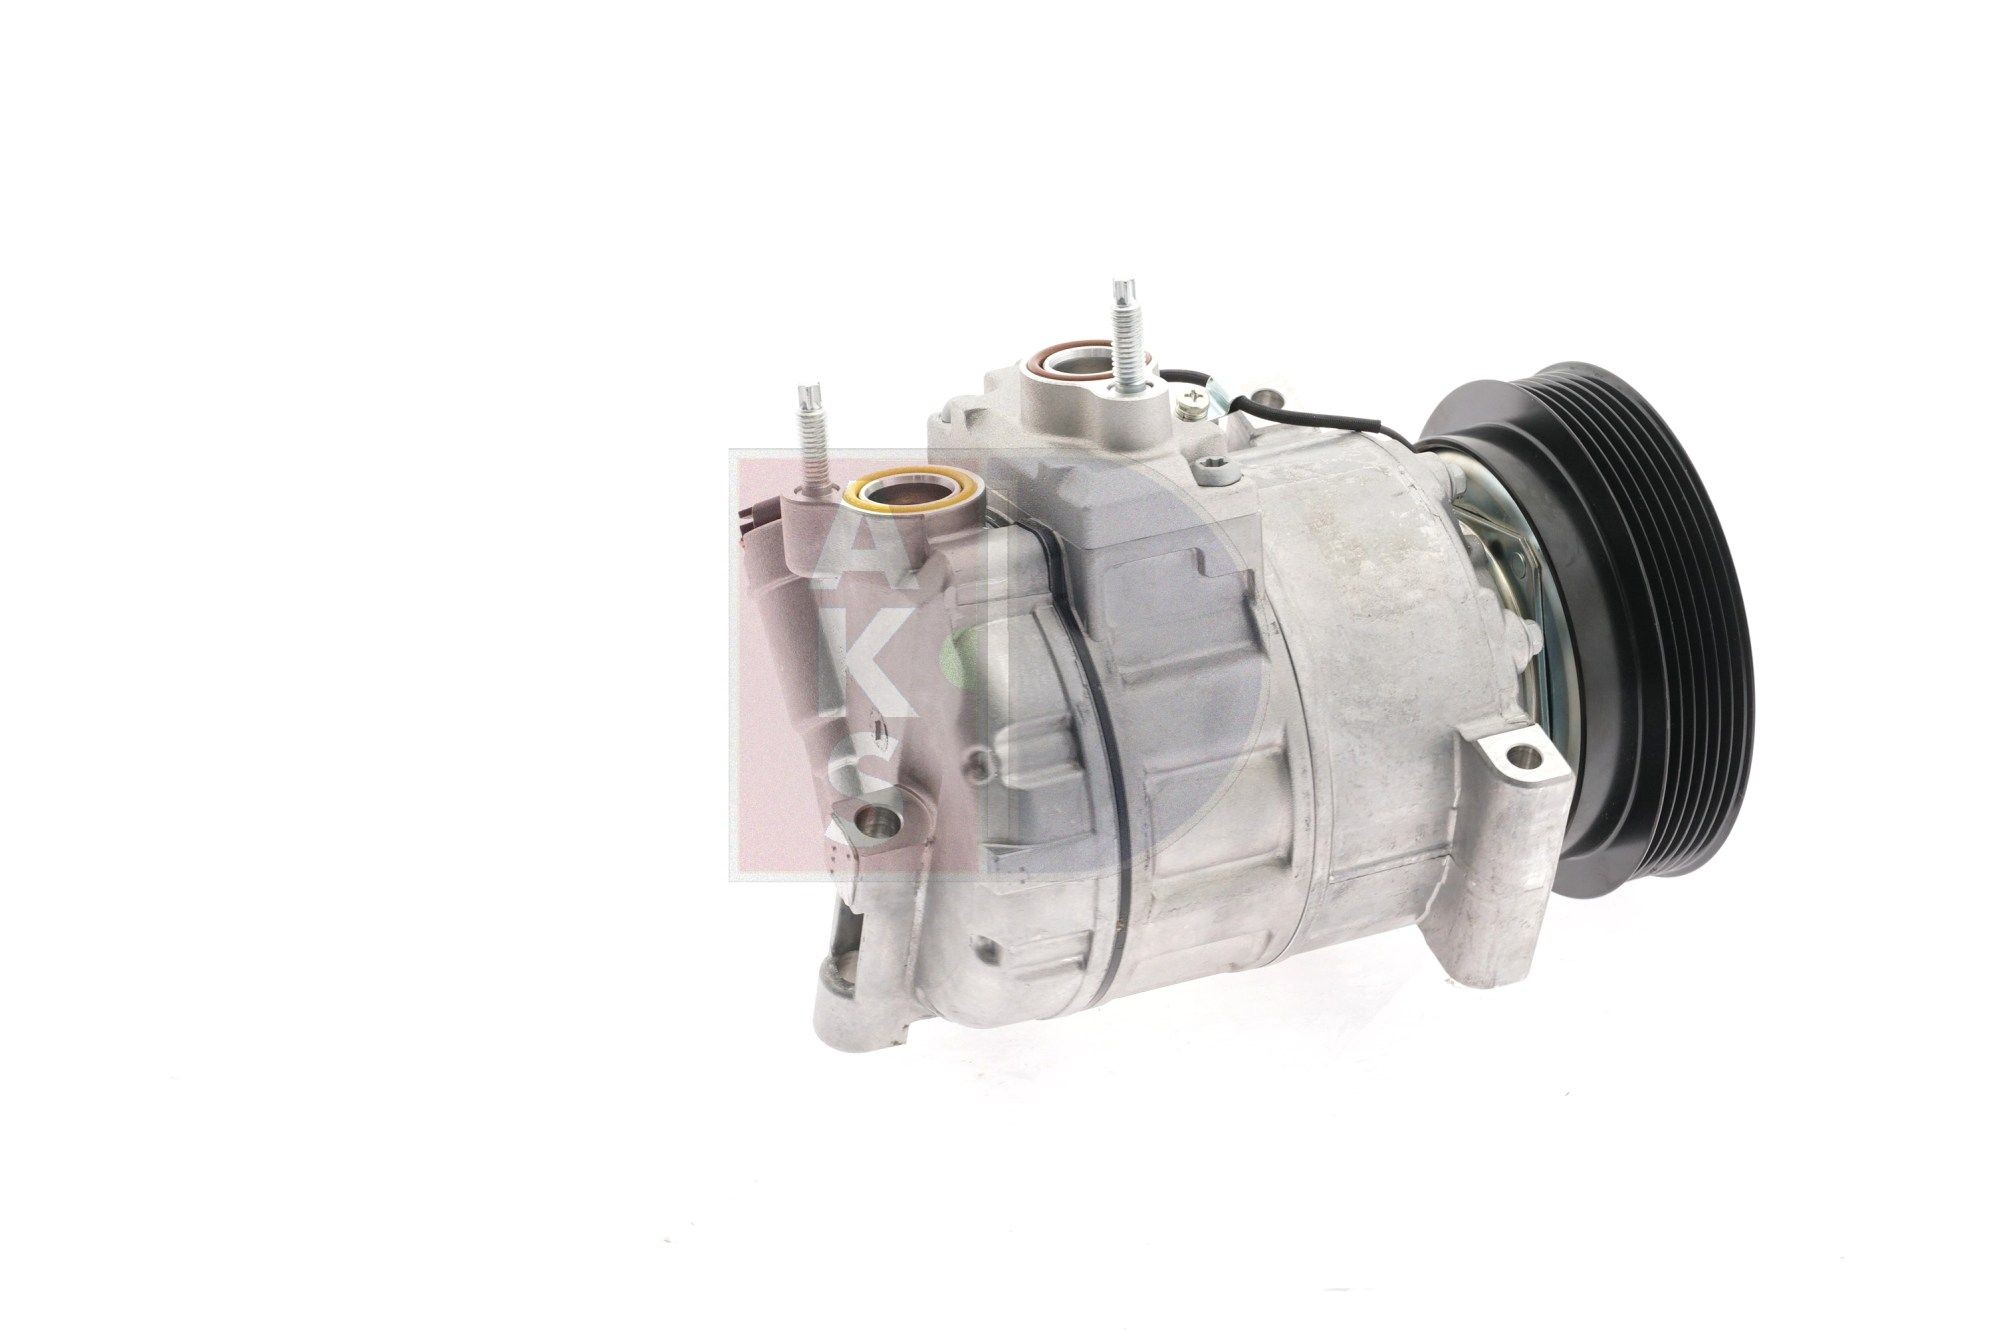 Air conditioning compressor 851893N from AKS DASIS